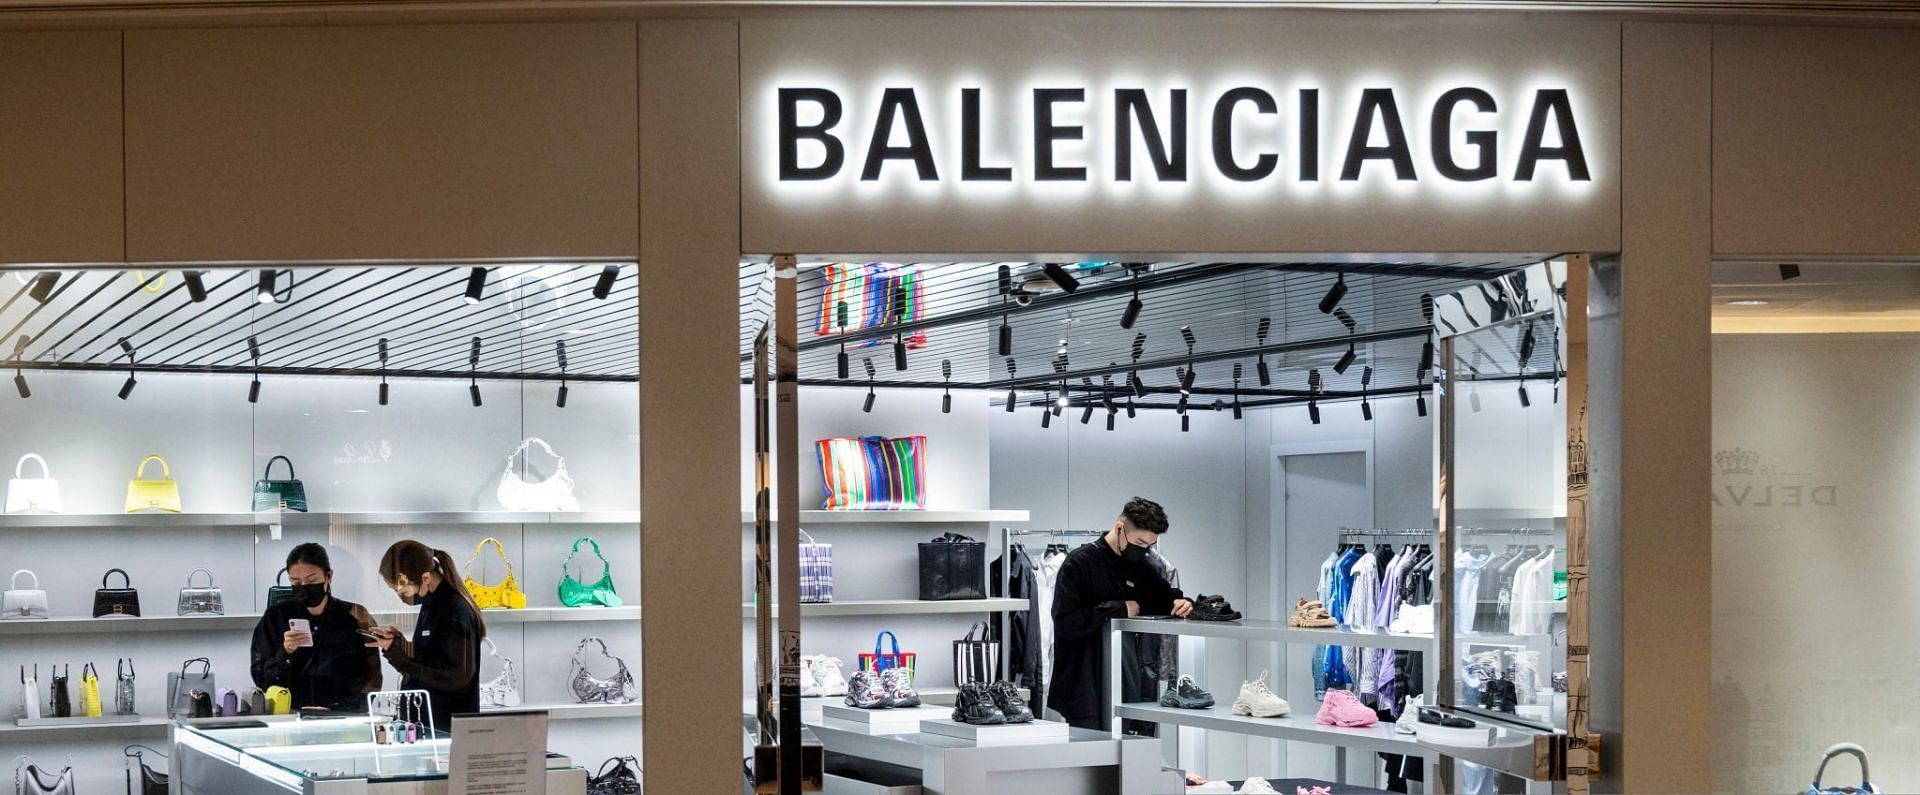 Netizens continue to call Balenciaga as the brand drops the lawsuit (Image via Getty Images)